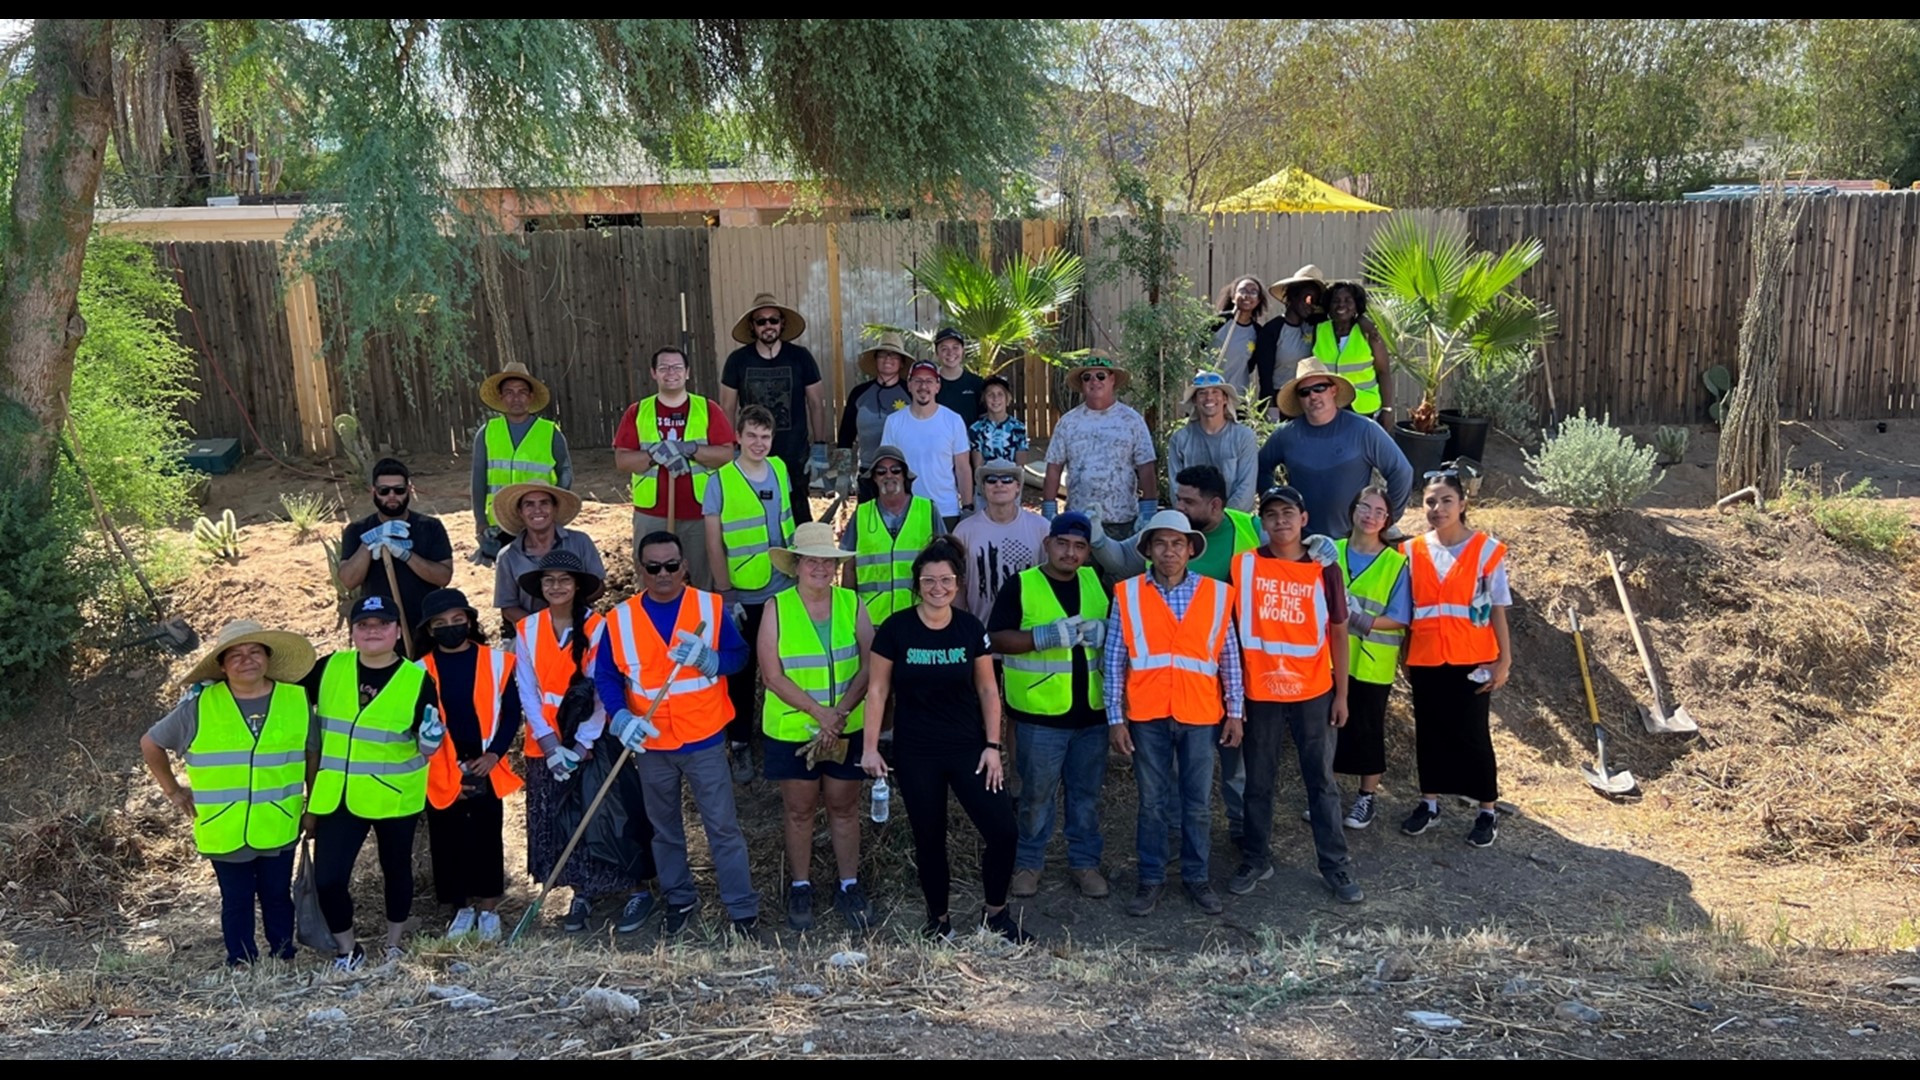 Norton Vista residents were using cacti to help clean and beautify abandoned alleyways